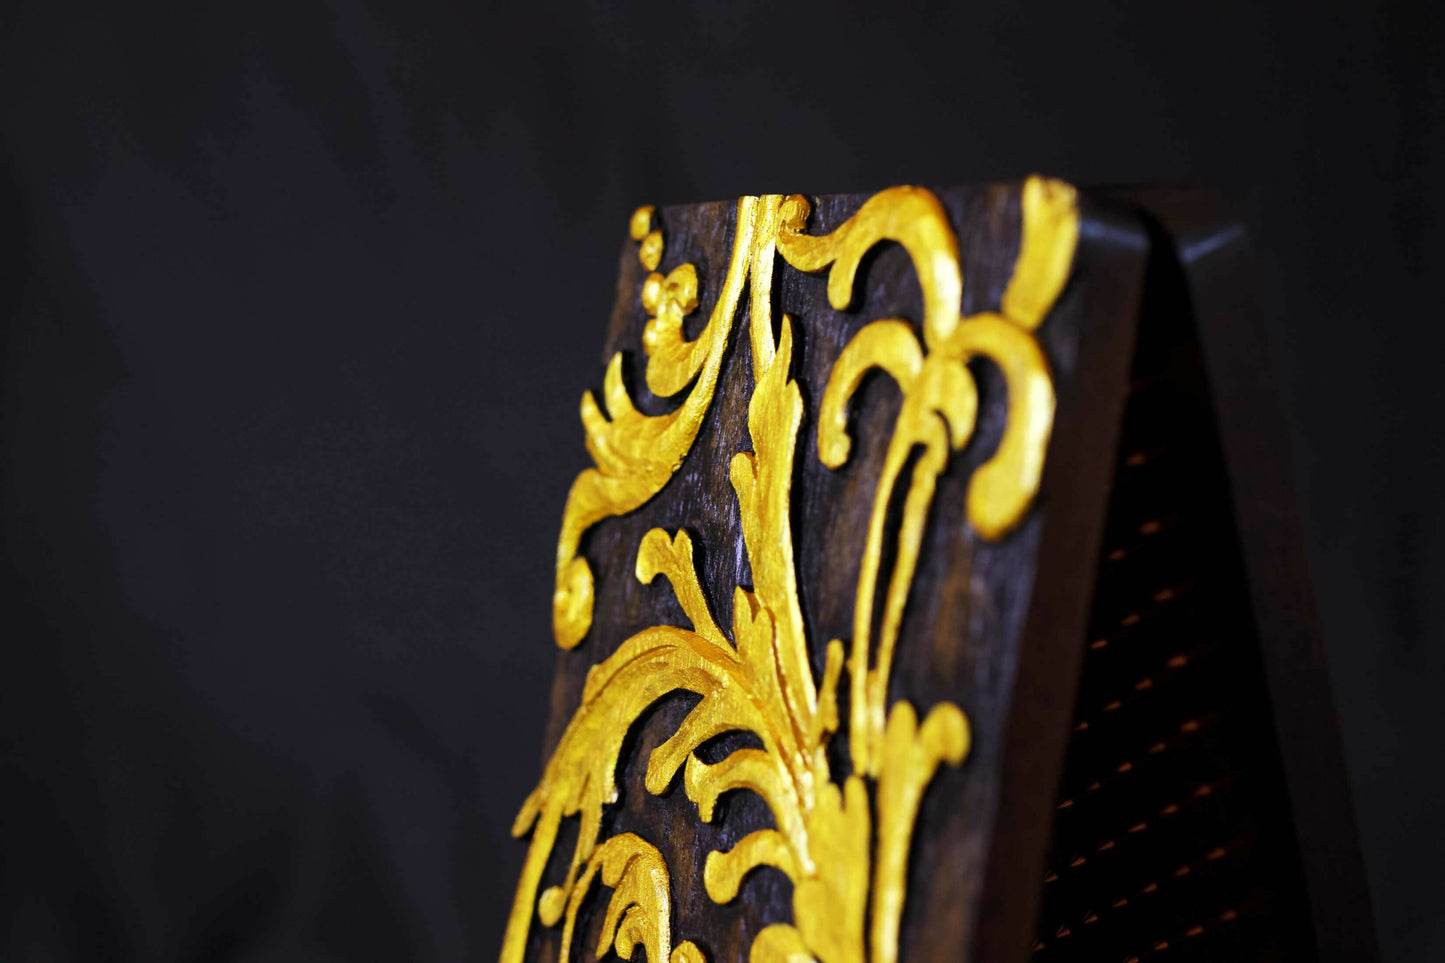 Sadhu board with hand carved openwork pattern, premium quality.